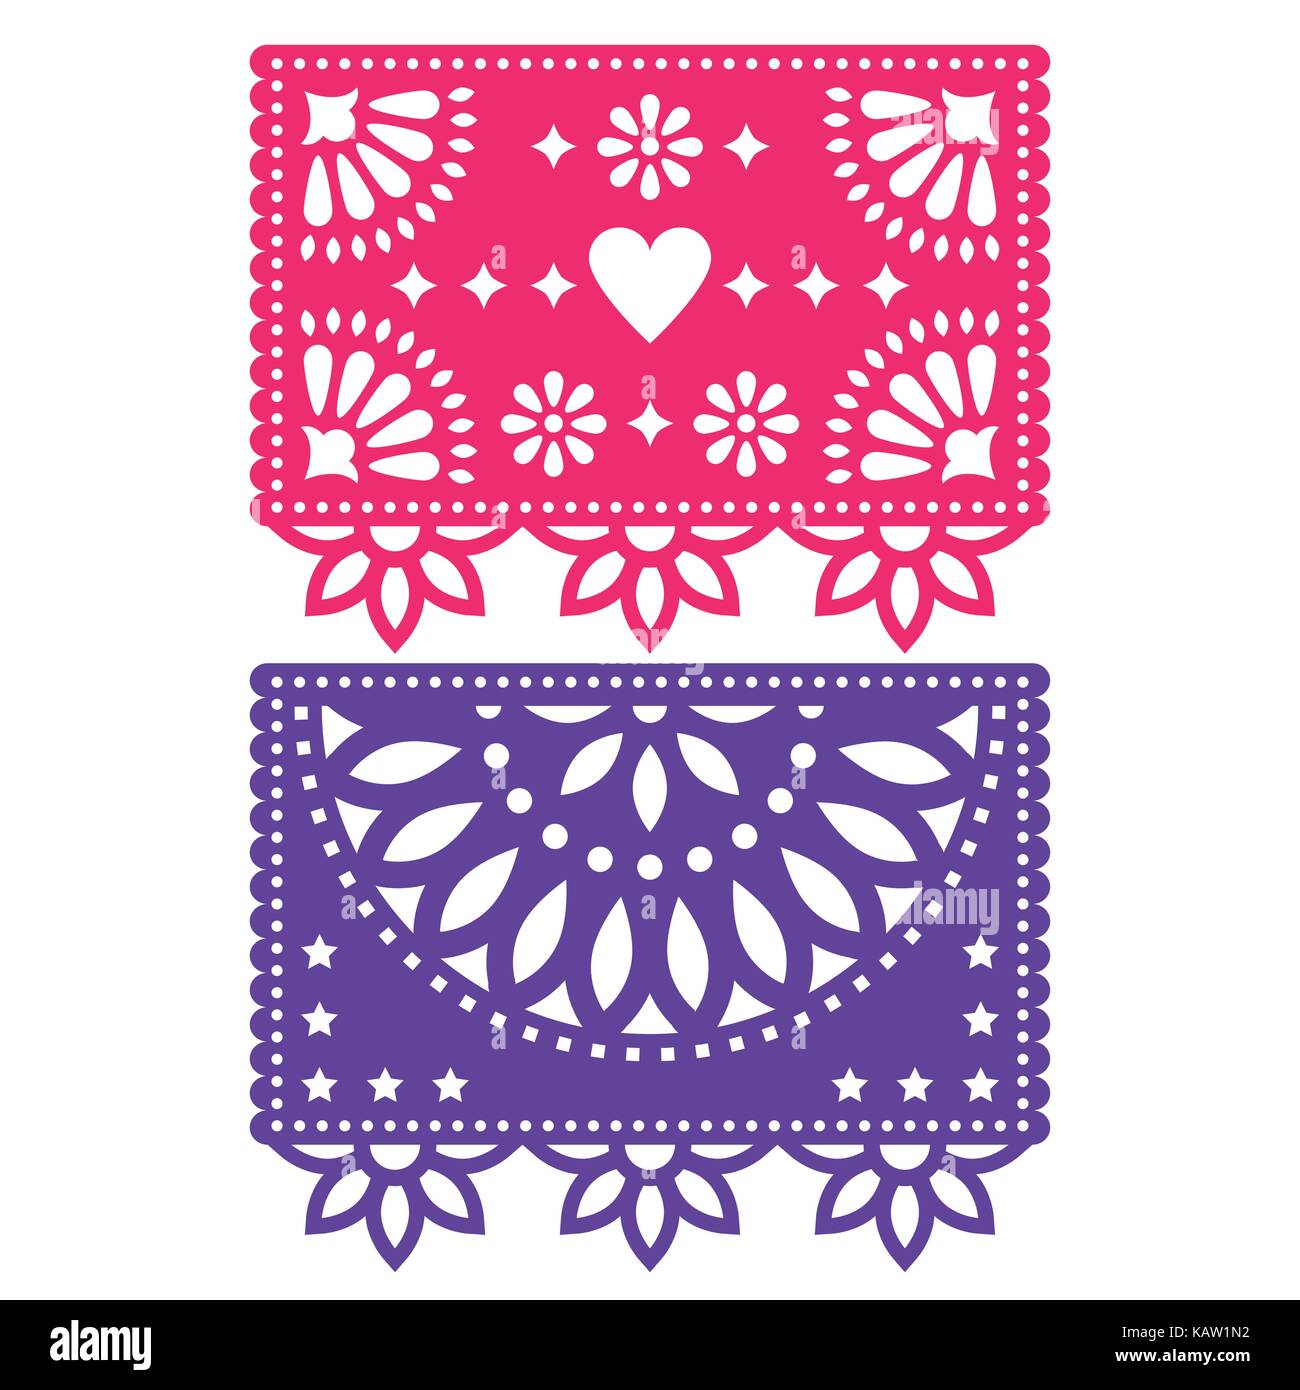 Papel Picado vector template design set, Mexican paper decorations flowers and geometric shapes, two party banners Stock Vector